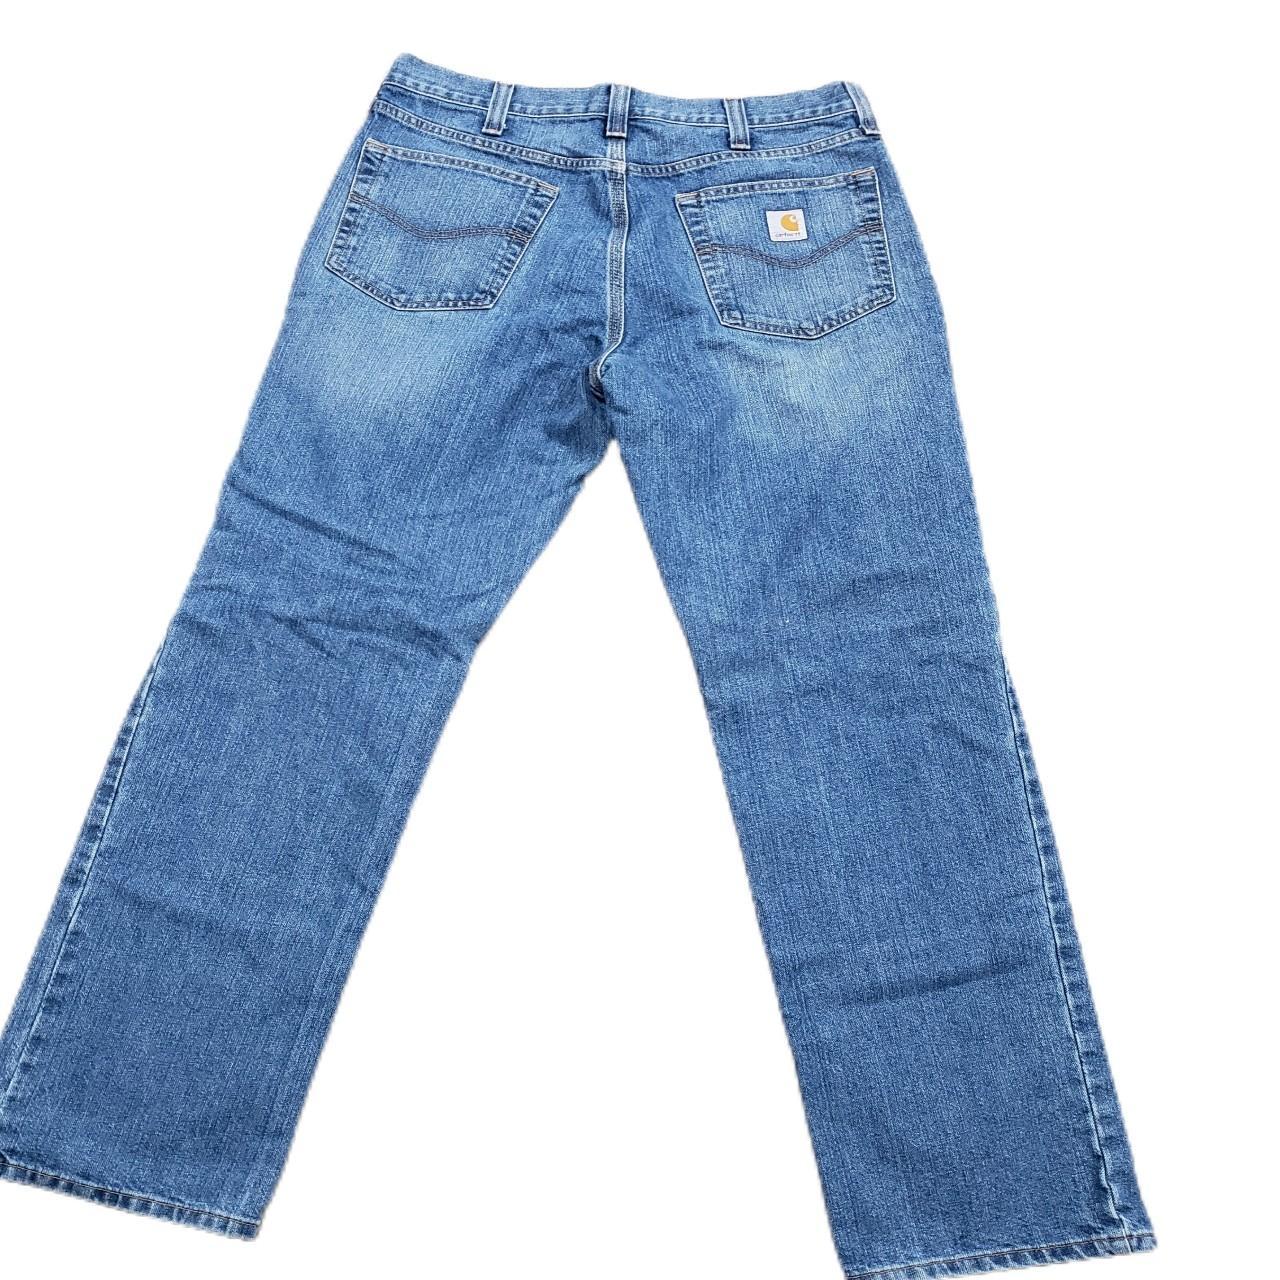 Product Image 1 - Men's Carhartt Jeans 

Size: 33X34